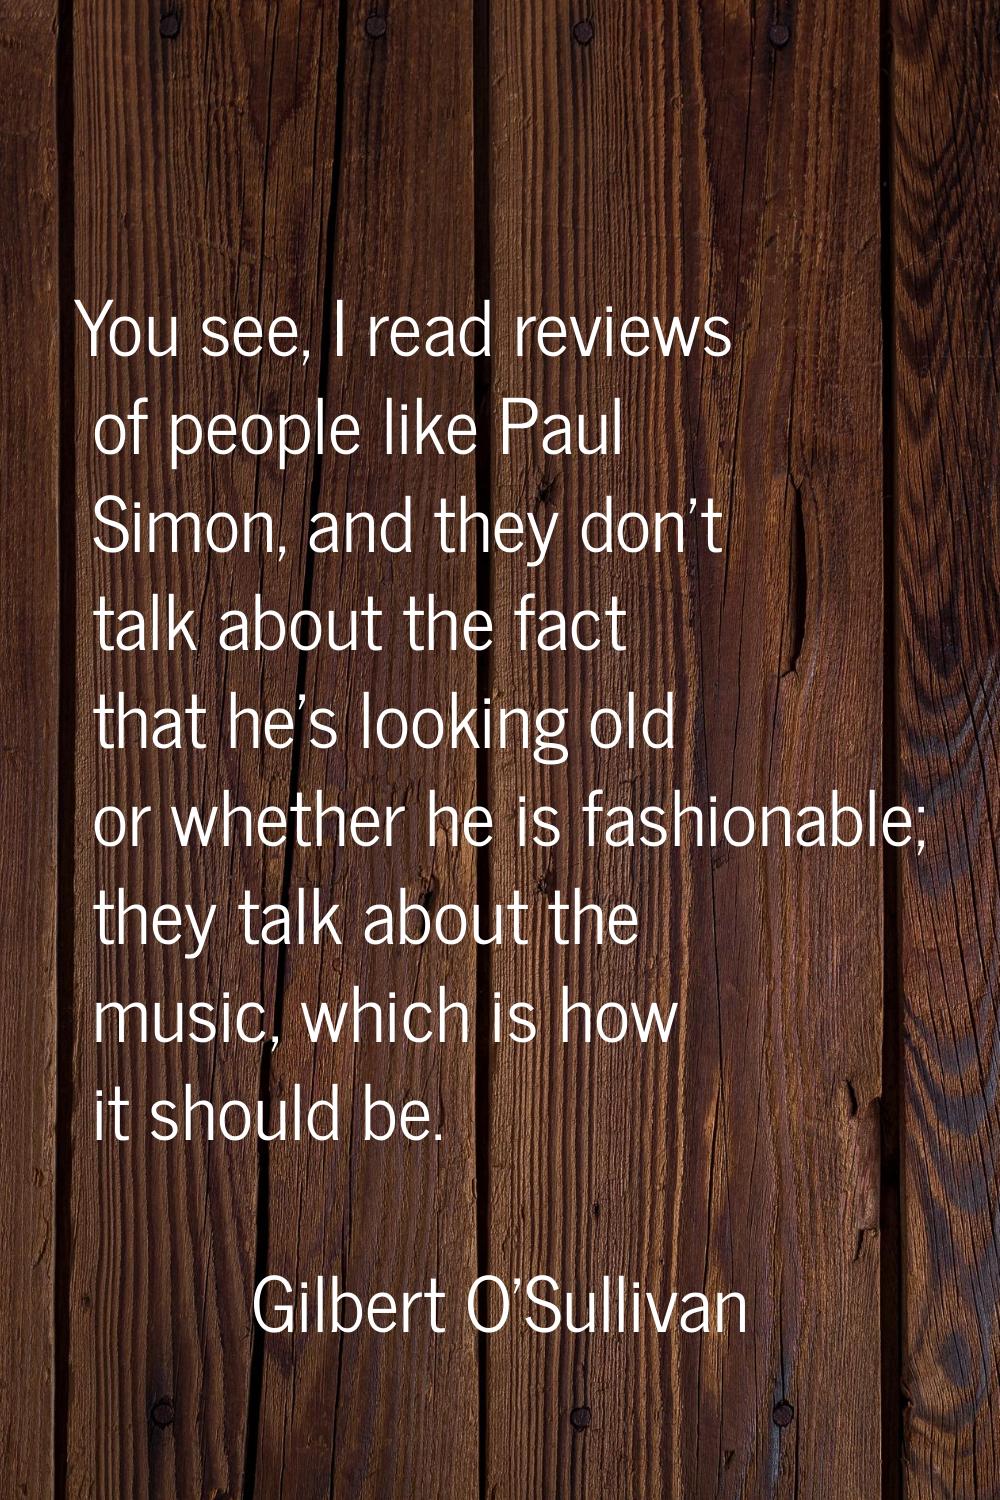 You see, I read reviews of people like Paul Simon, and they don't talk about the fact that he's loo